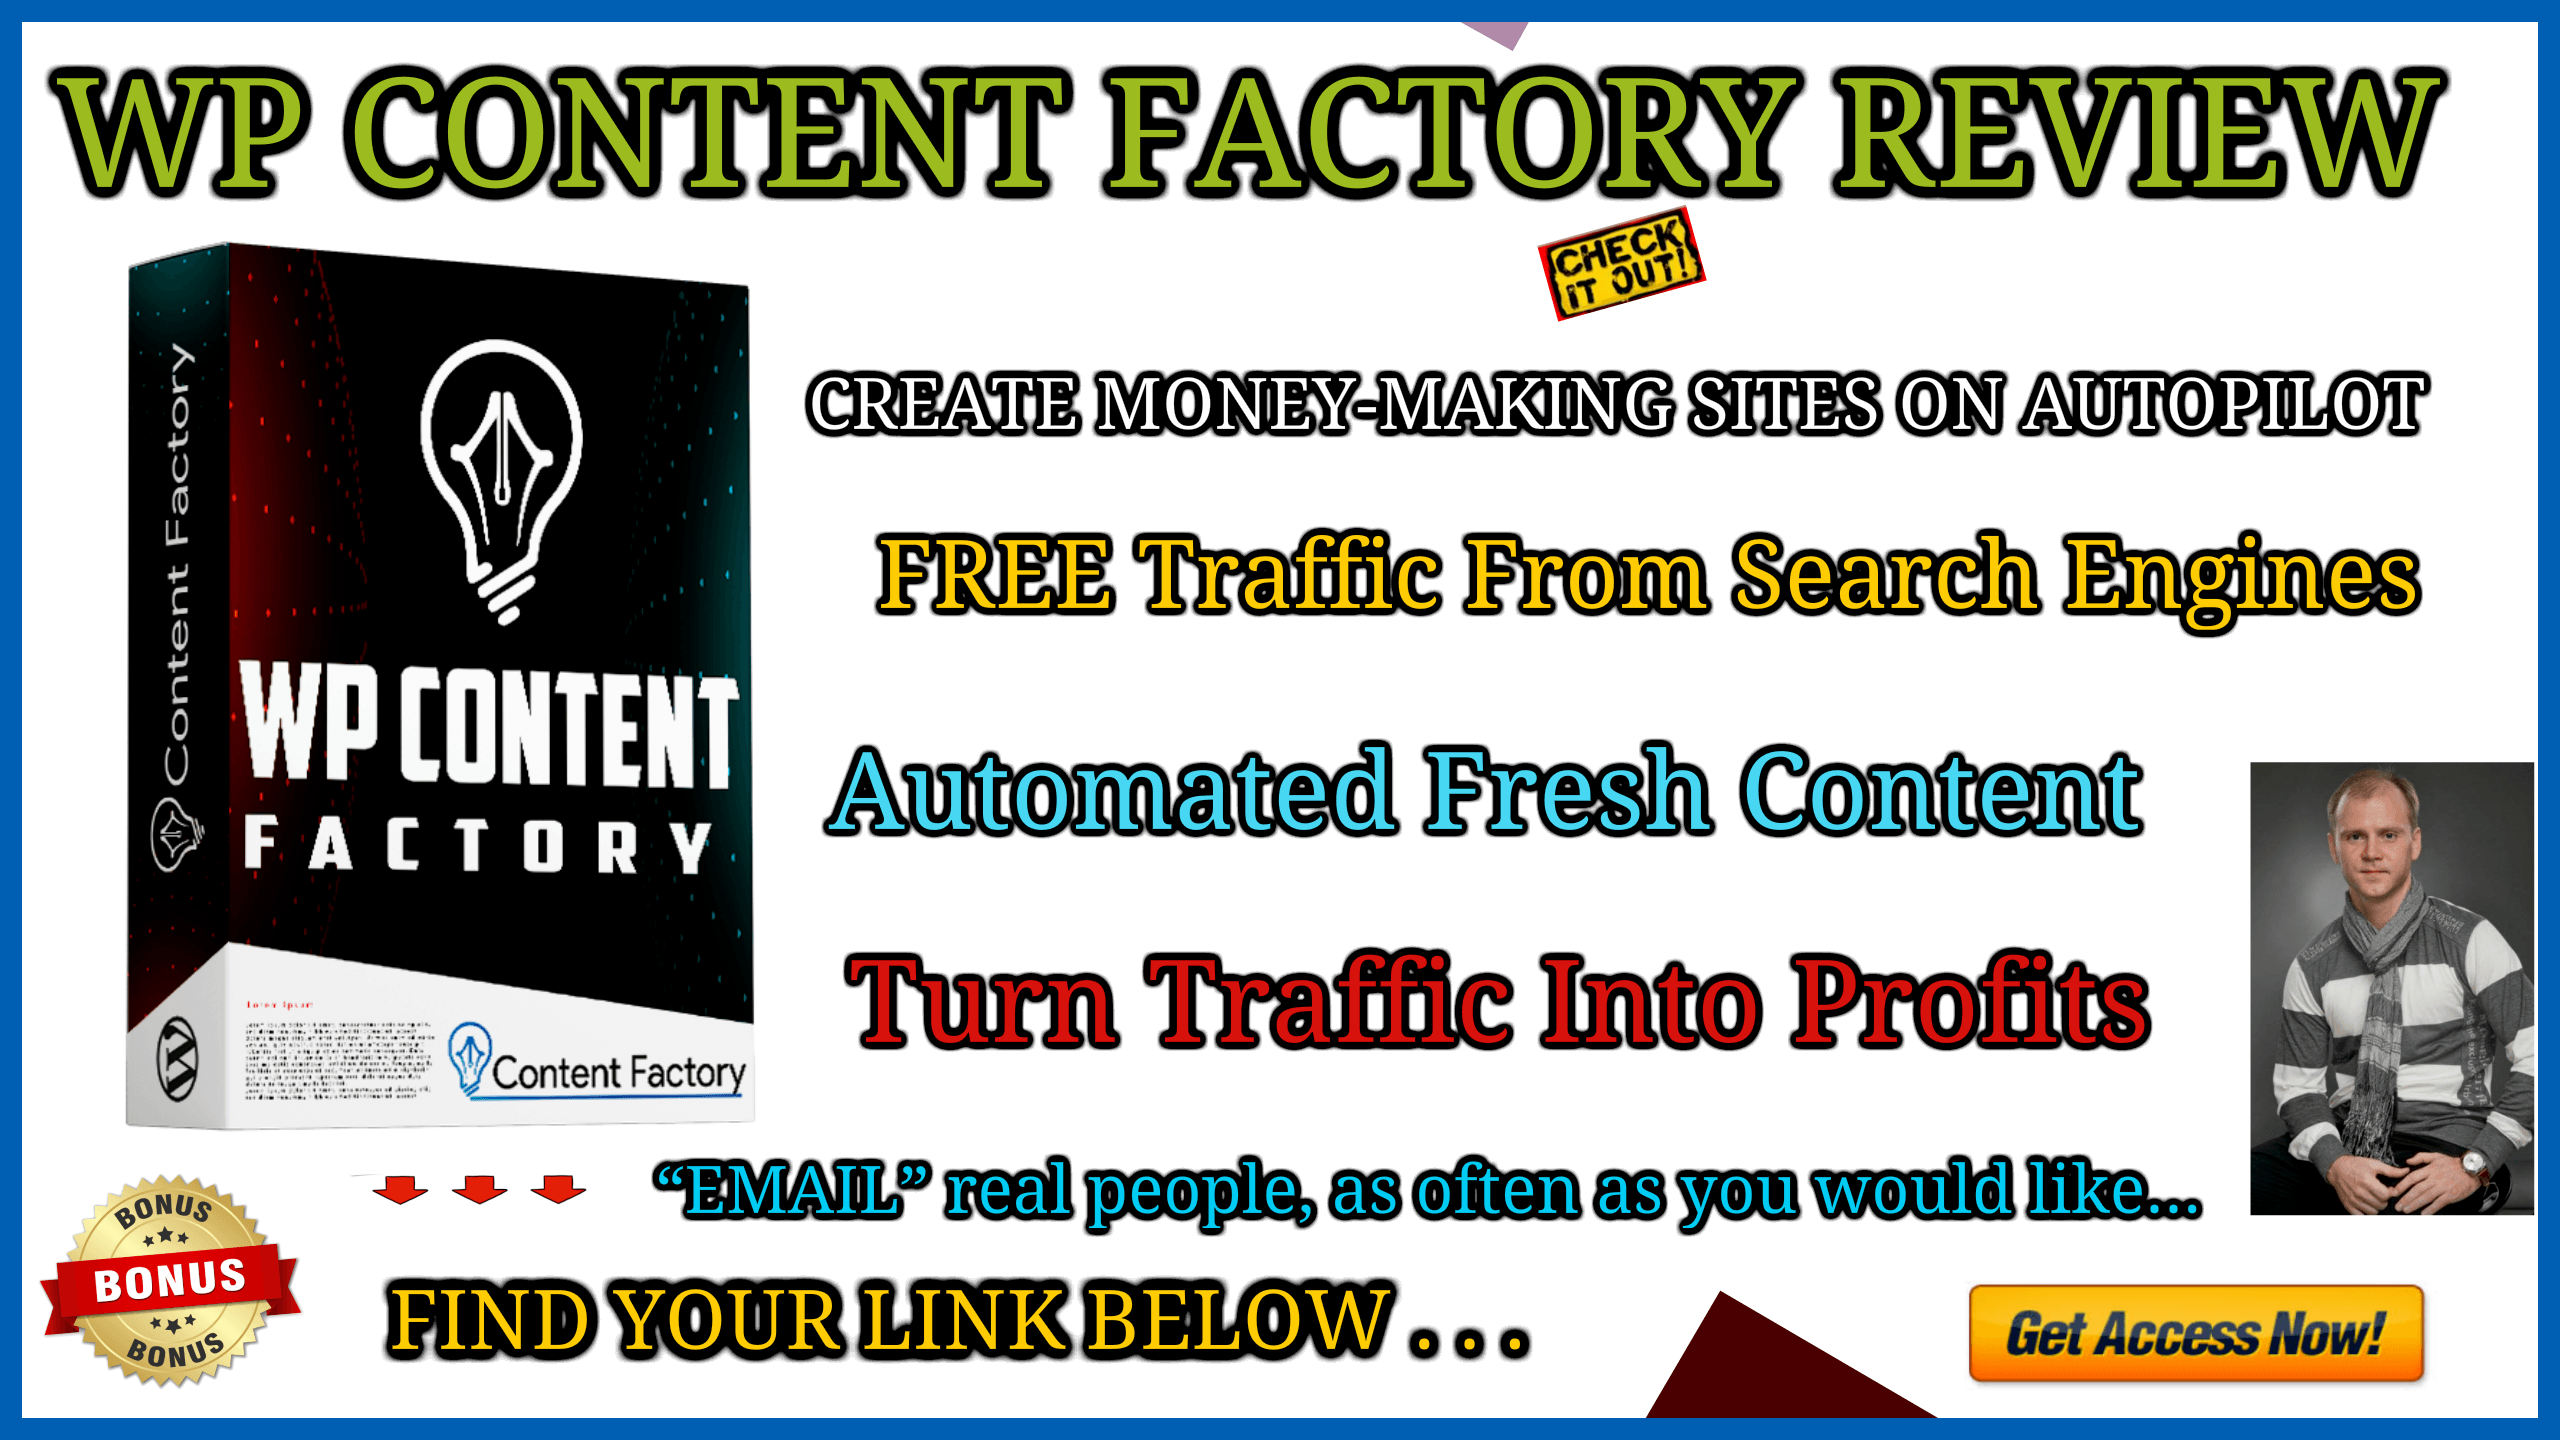 WP Content Factory review and bonus